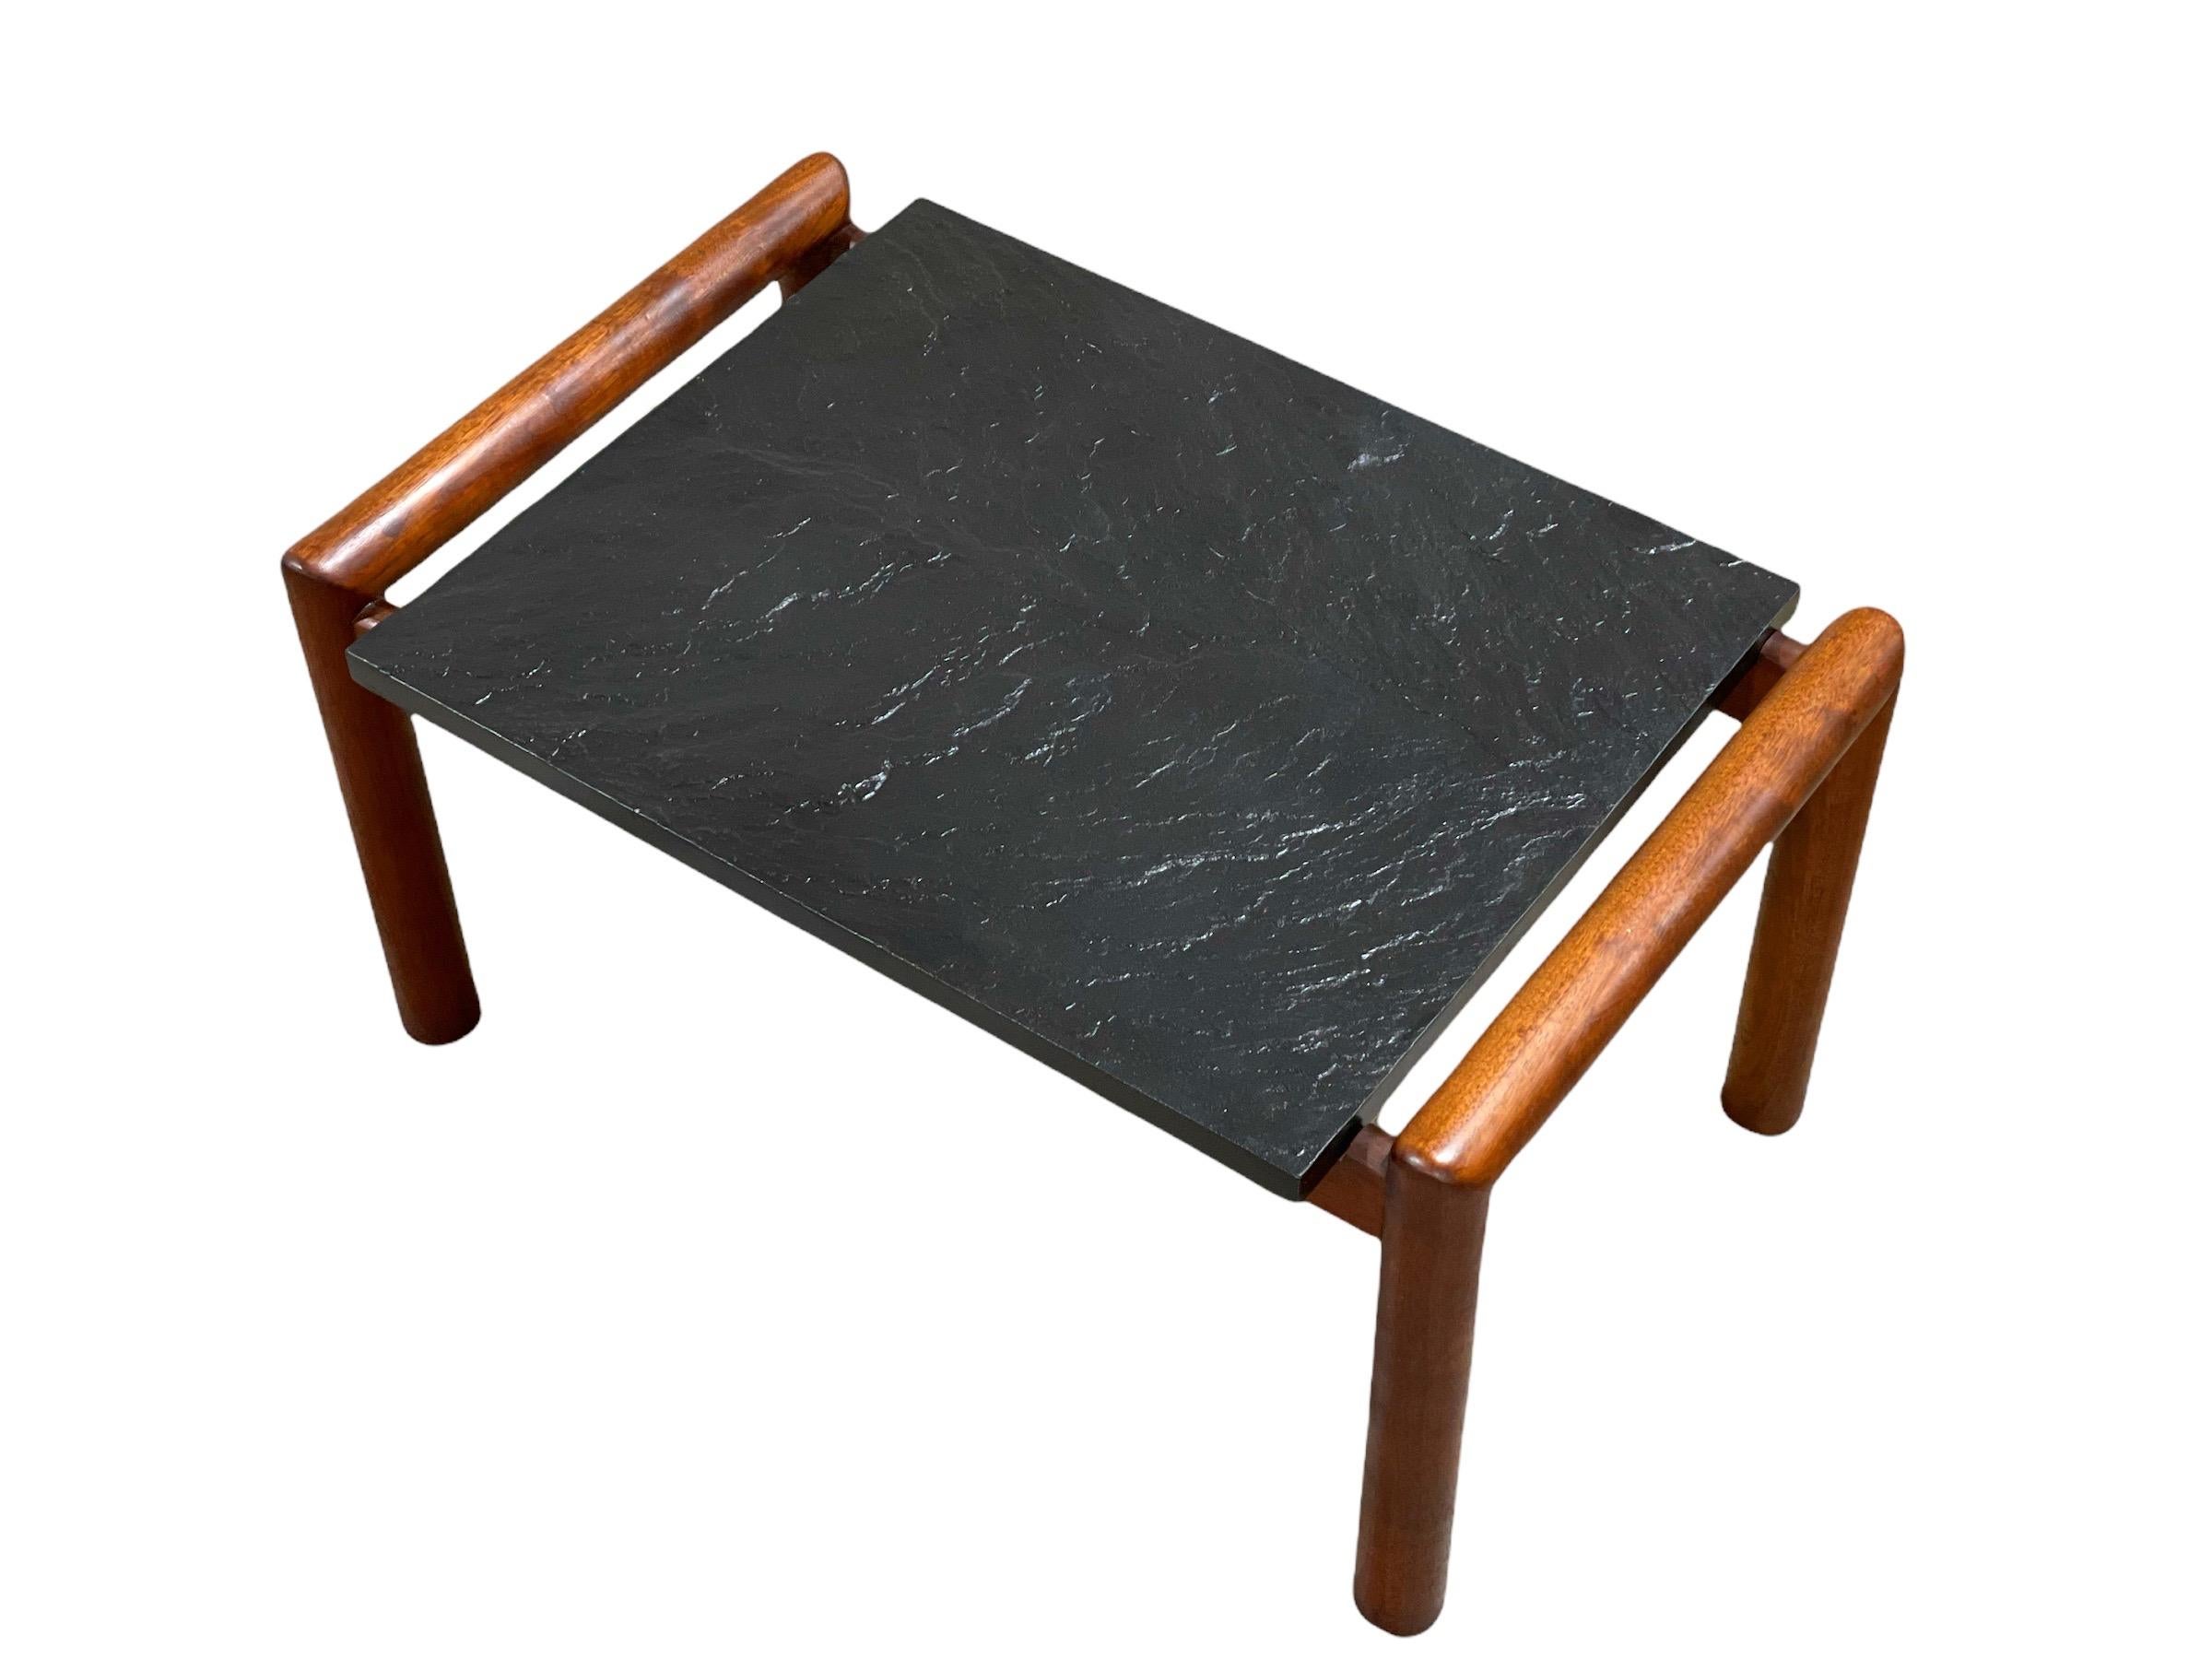 Pair Adrian Pearsall Midcentury Organic Modern Side Tables in Walnut and Slate For Sale 1